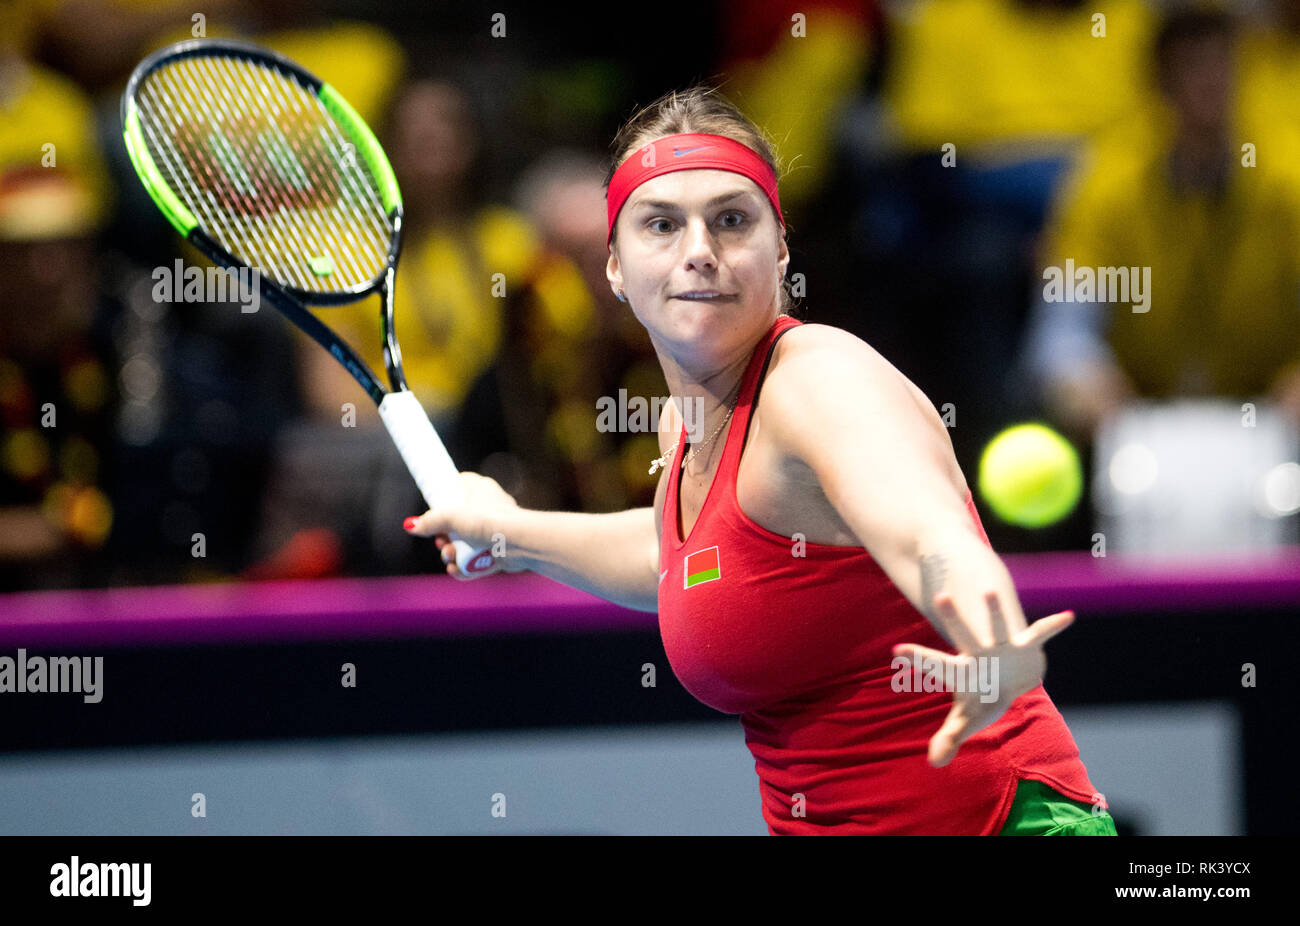 Braunschweig, Germany. 09th Feb, 2019. Tennis, ladies: Federation Cup -  World Group, Round 1, Germany - Belarus: Belarusian Aryna Sabalenka beats a  forehand in the singles against Germany's Petkovic. Credit: Julian  Stratenschulte/dpa/Alamy